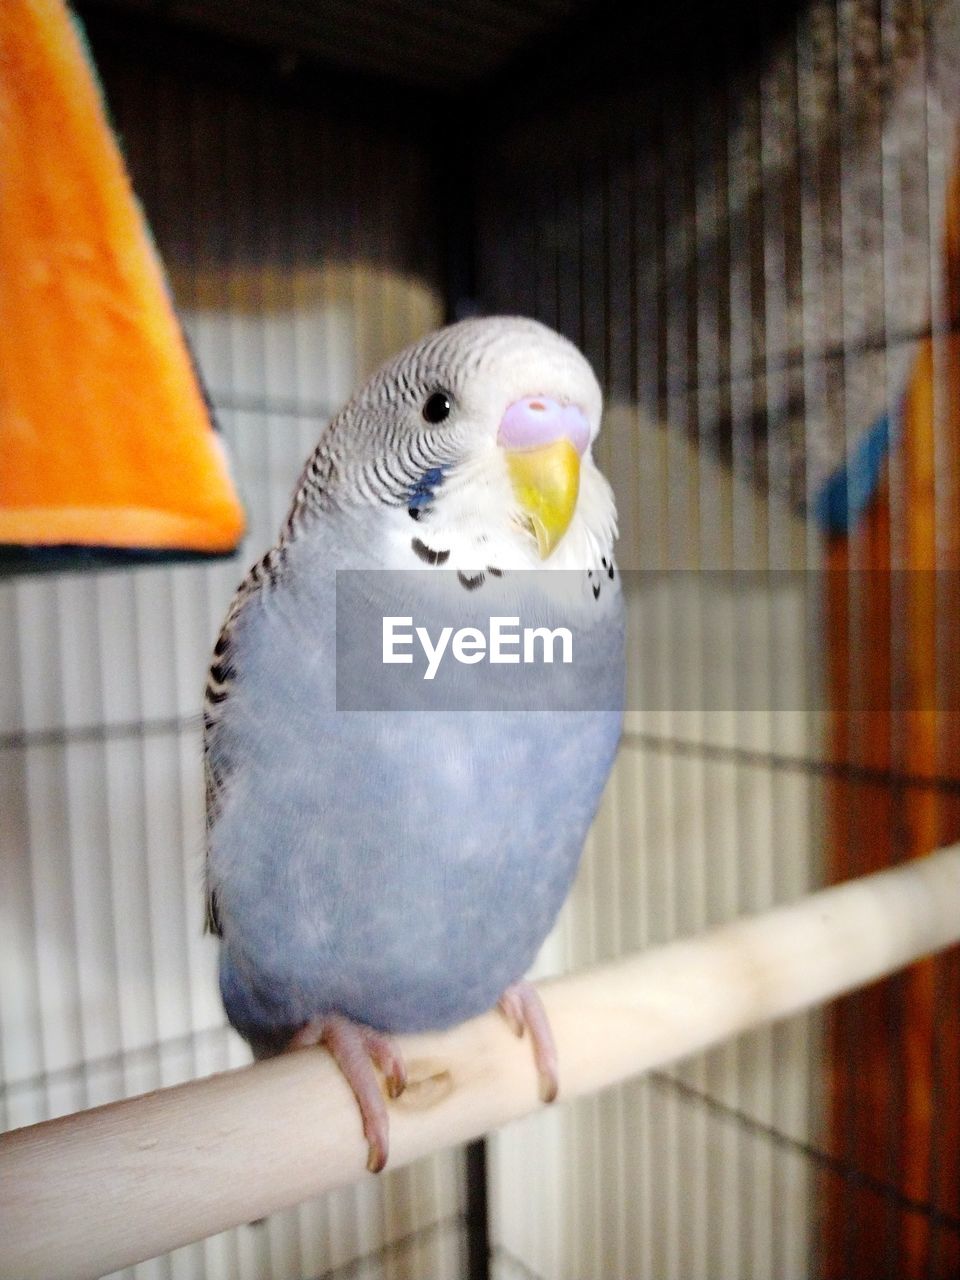 pet, animal themes, animal, bird, parakeet, parrot, cage, birdcage, beak, animal wildlife, perching, one animal, animals in captivity, budgerigar, yellow, no people, close-up, wildlife, focus on foreground, wing, lovebird, domestic animals, trapped, day, metal, indoors, nature